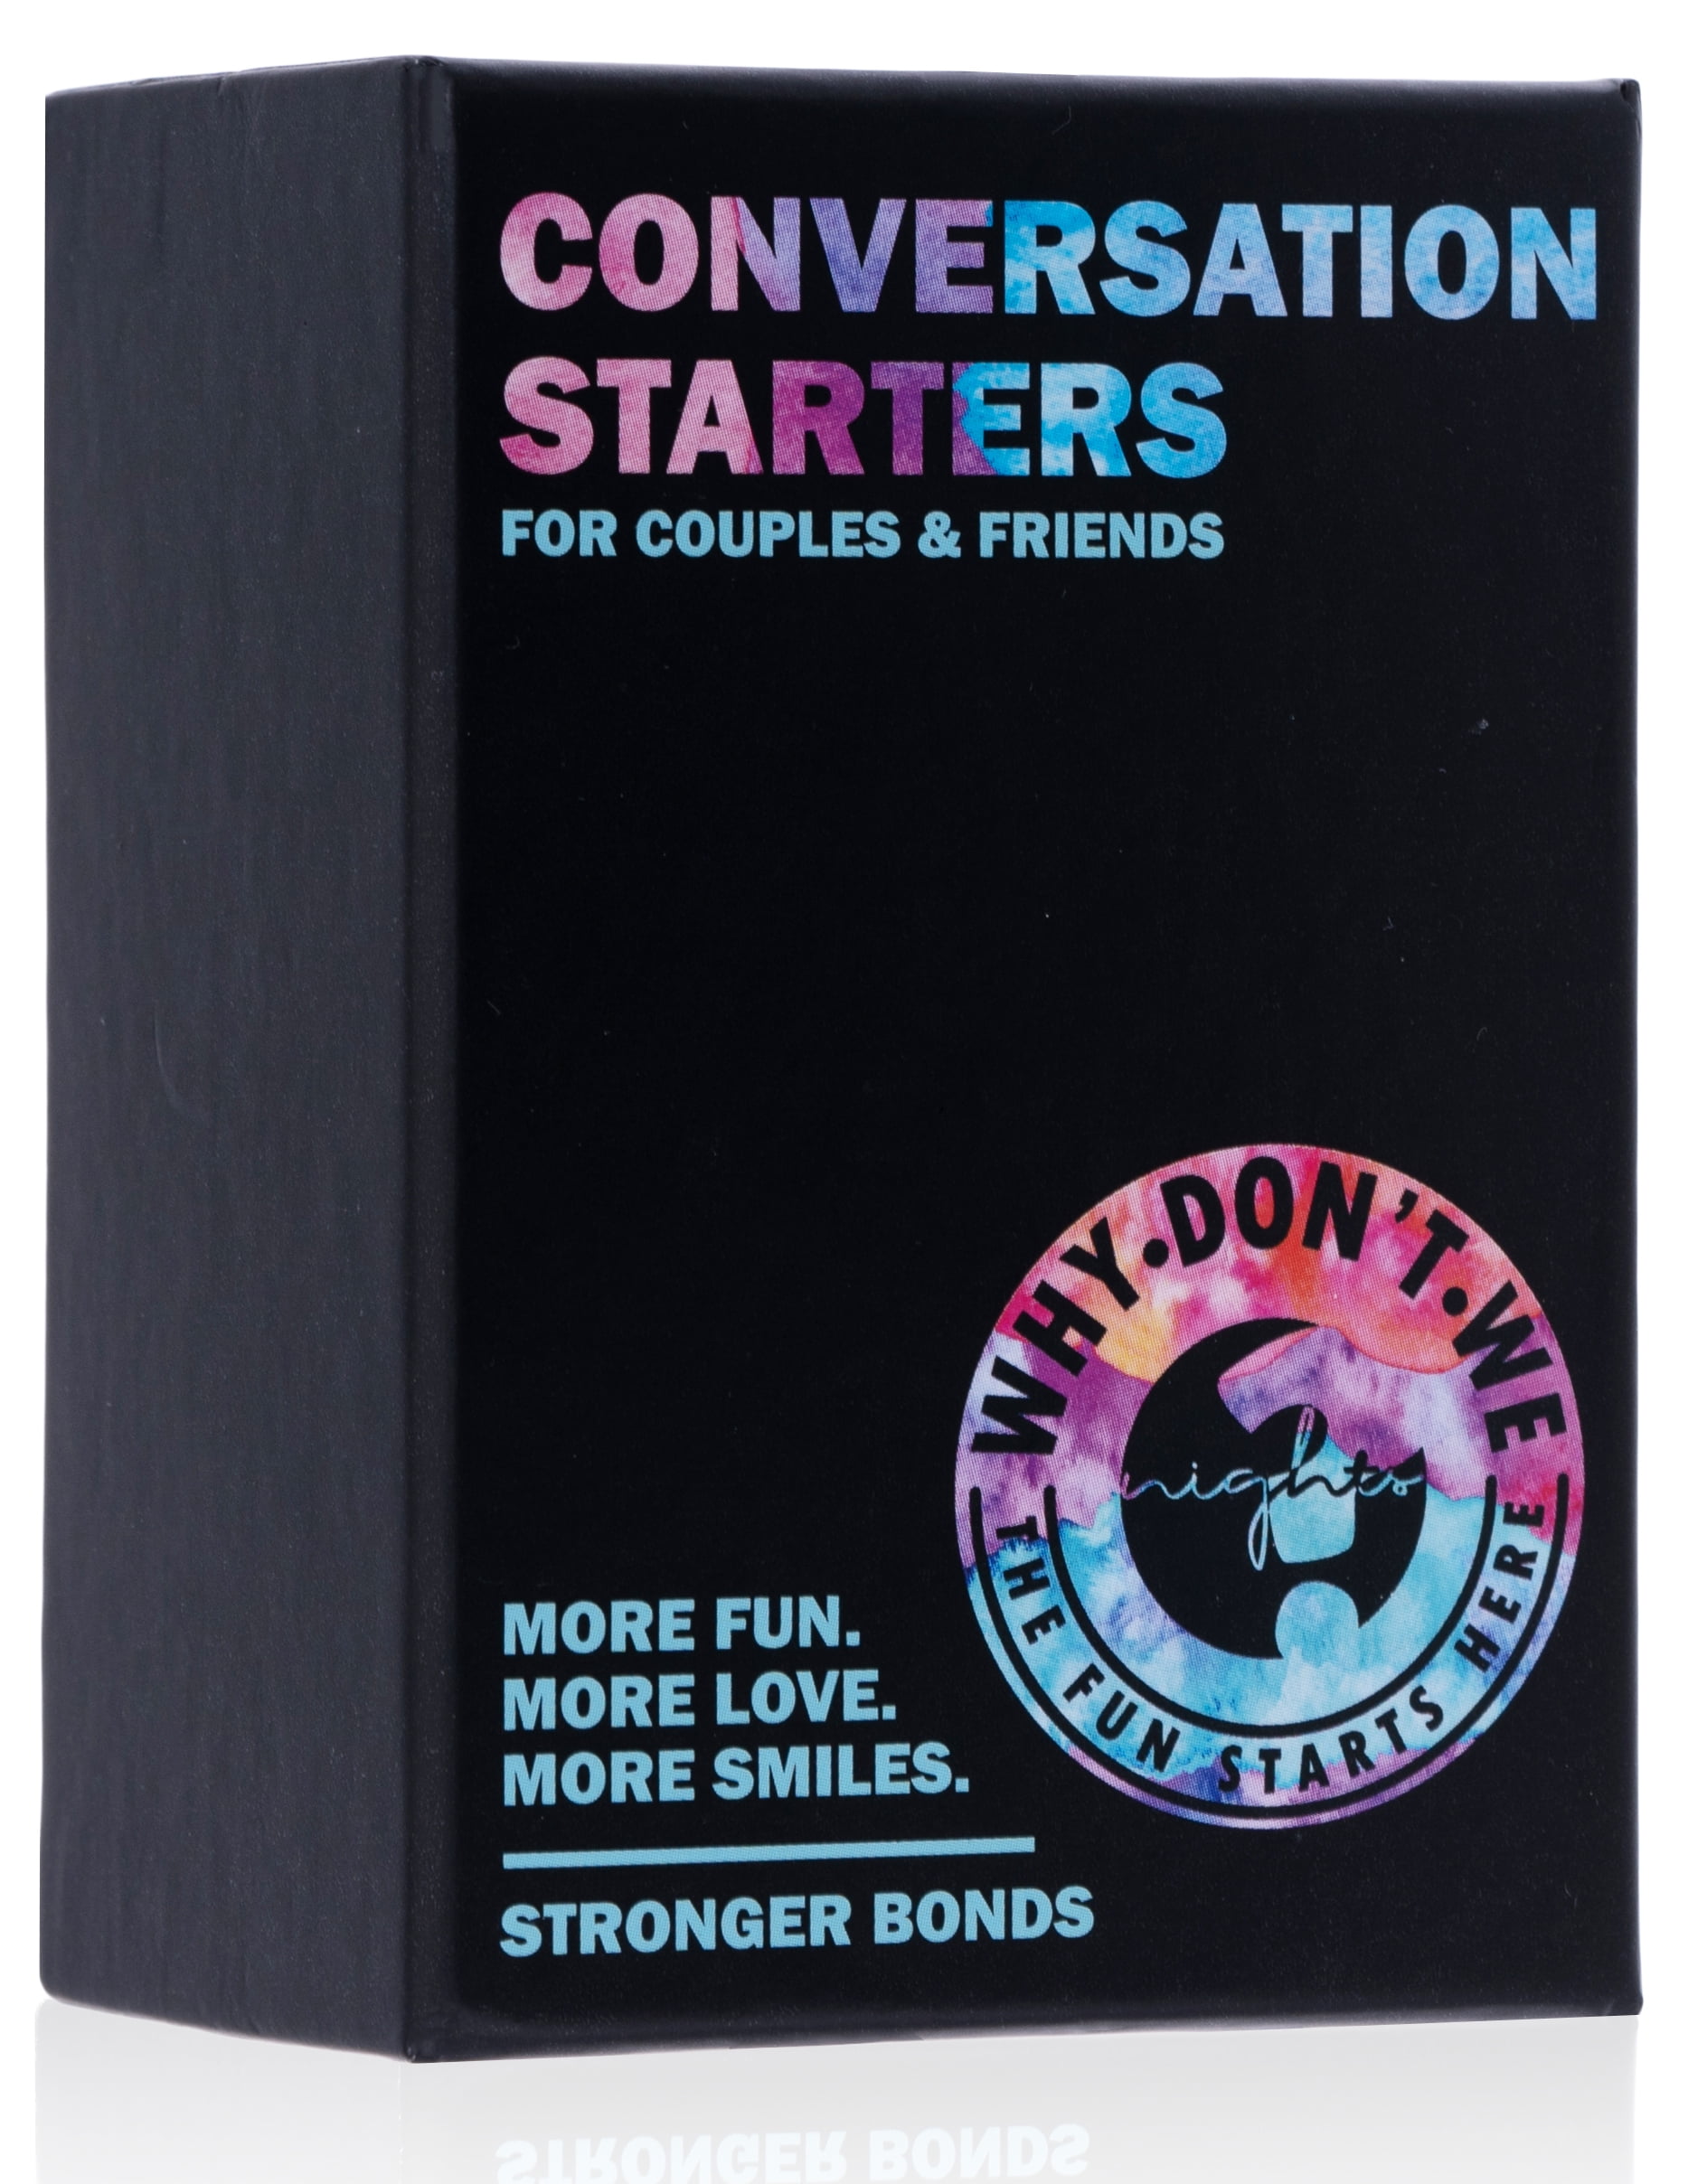 OUR MOMENTS Couples 100 Thought Provoking Conversation Starters Board Game Hot 